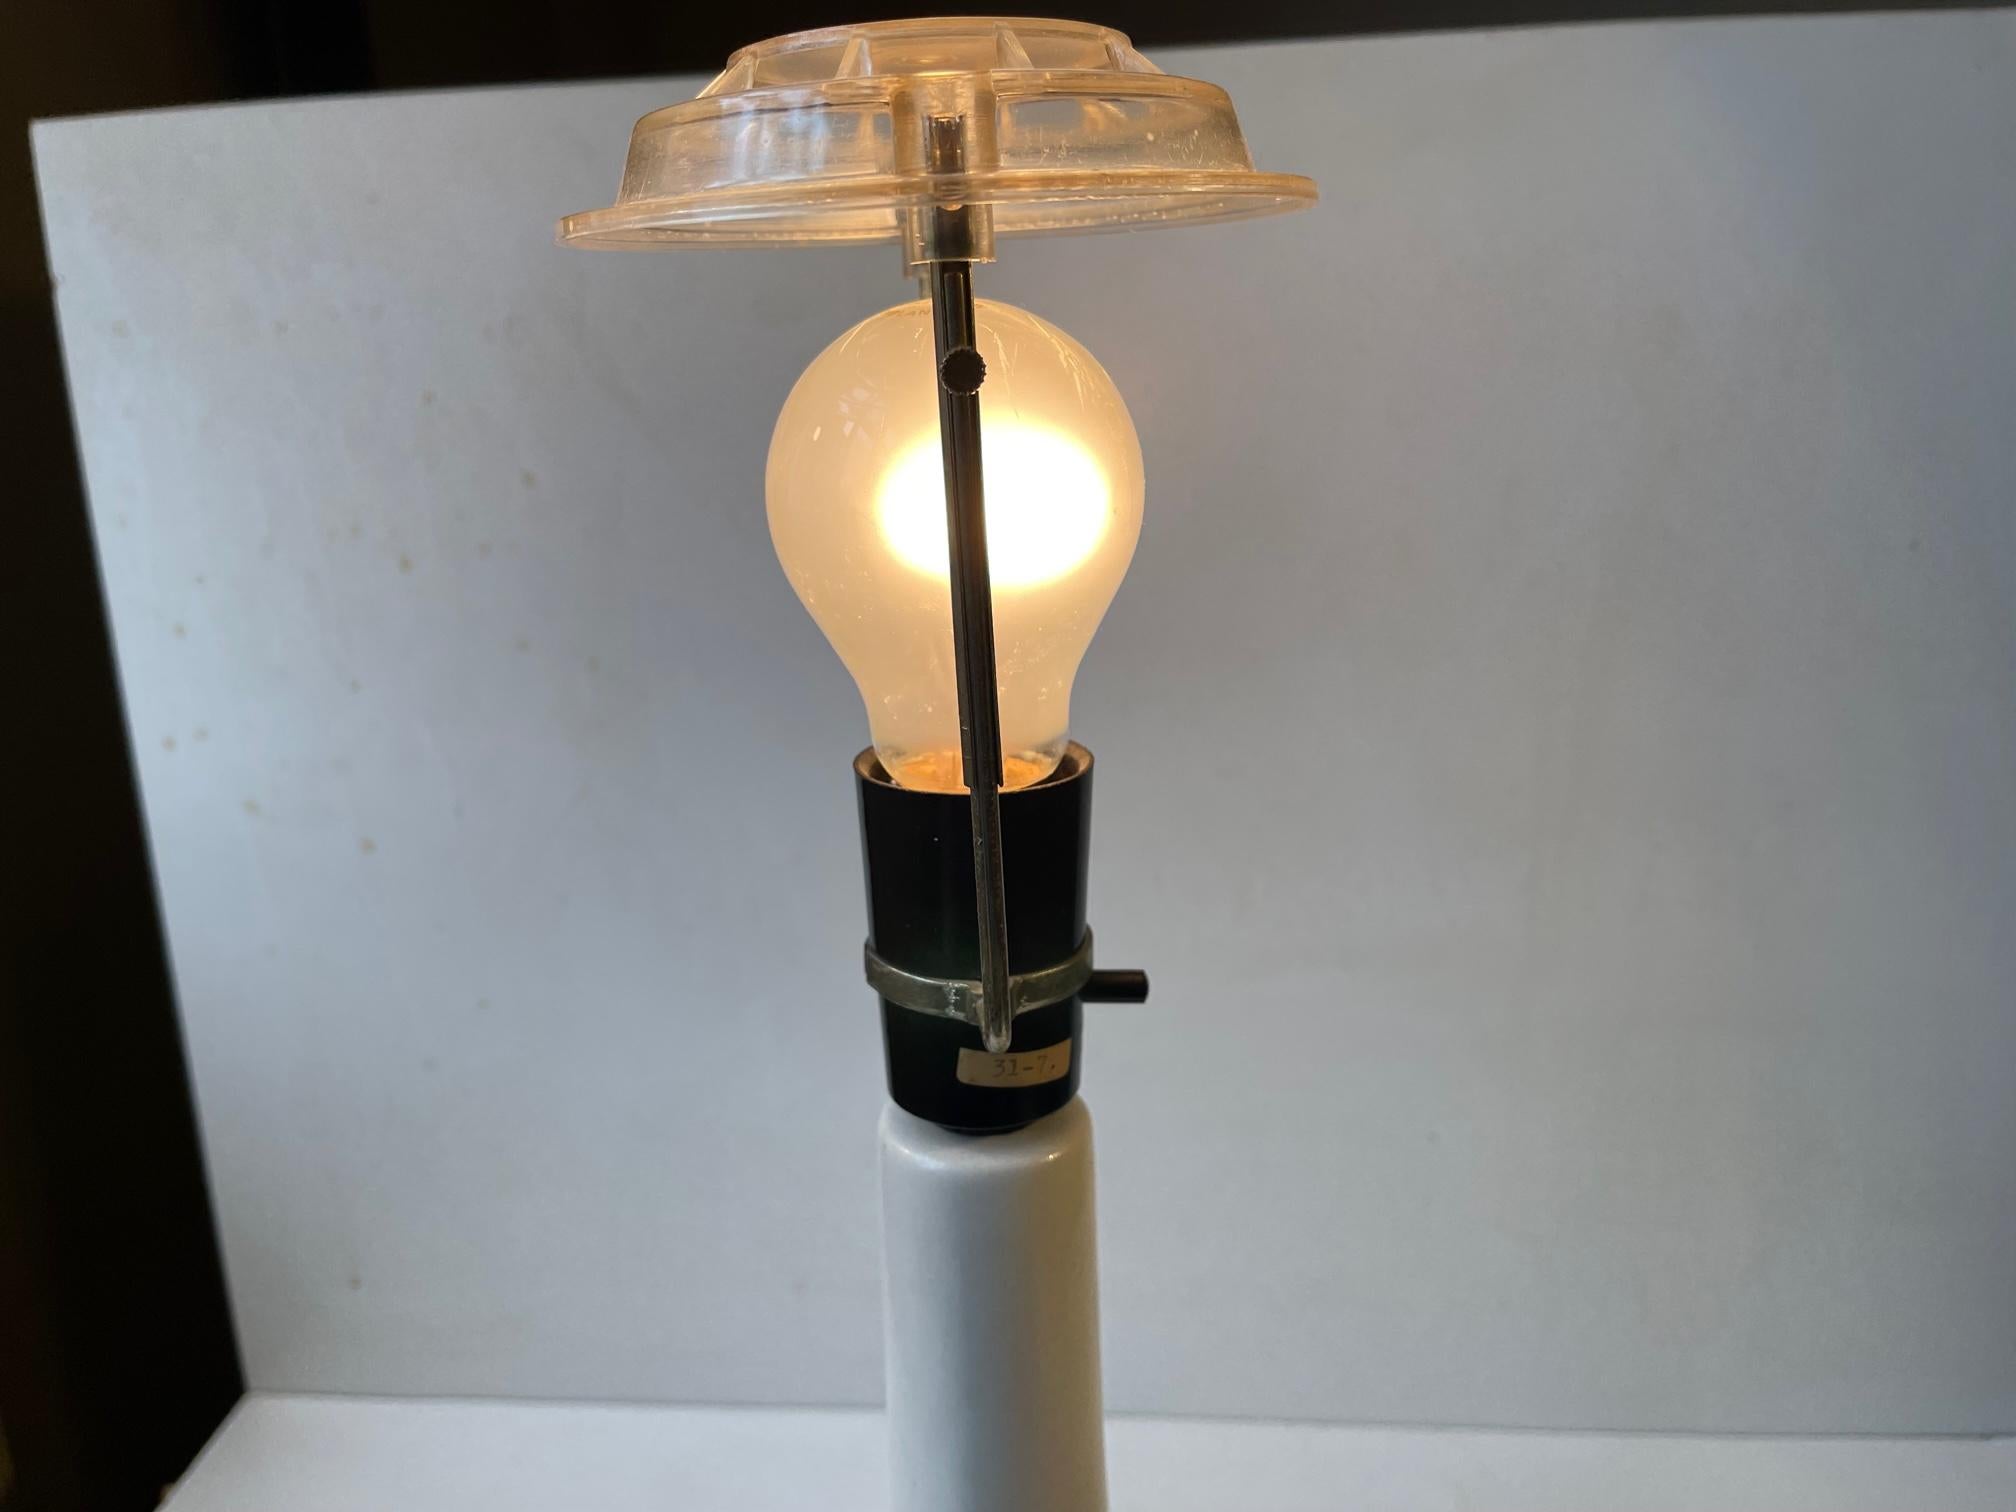 Mid-20th Century Danish Modern White Glazed Ceramic Table Lamp by C. Clausen, 1960s For Sale